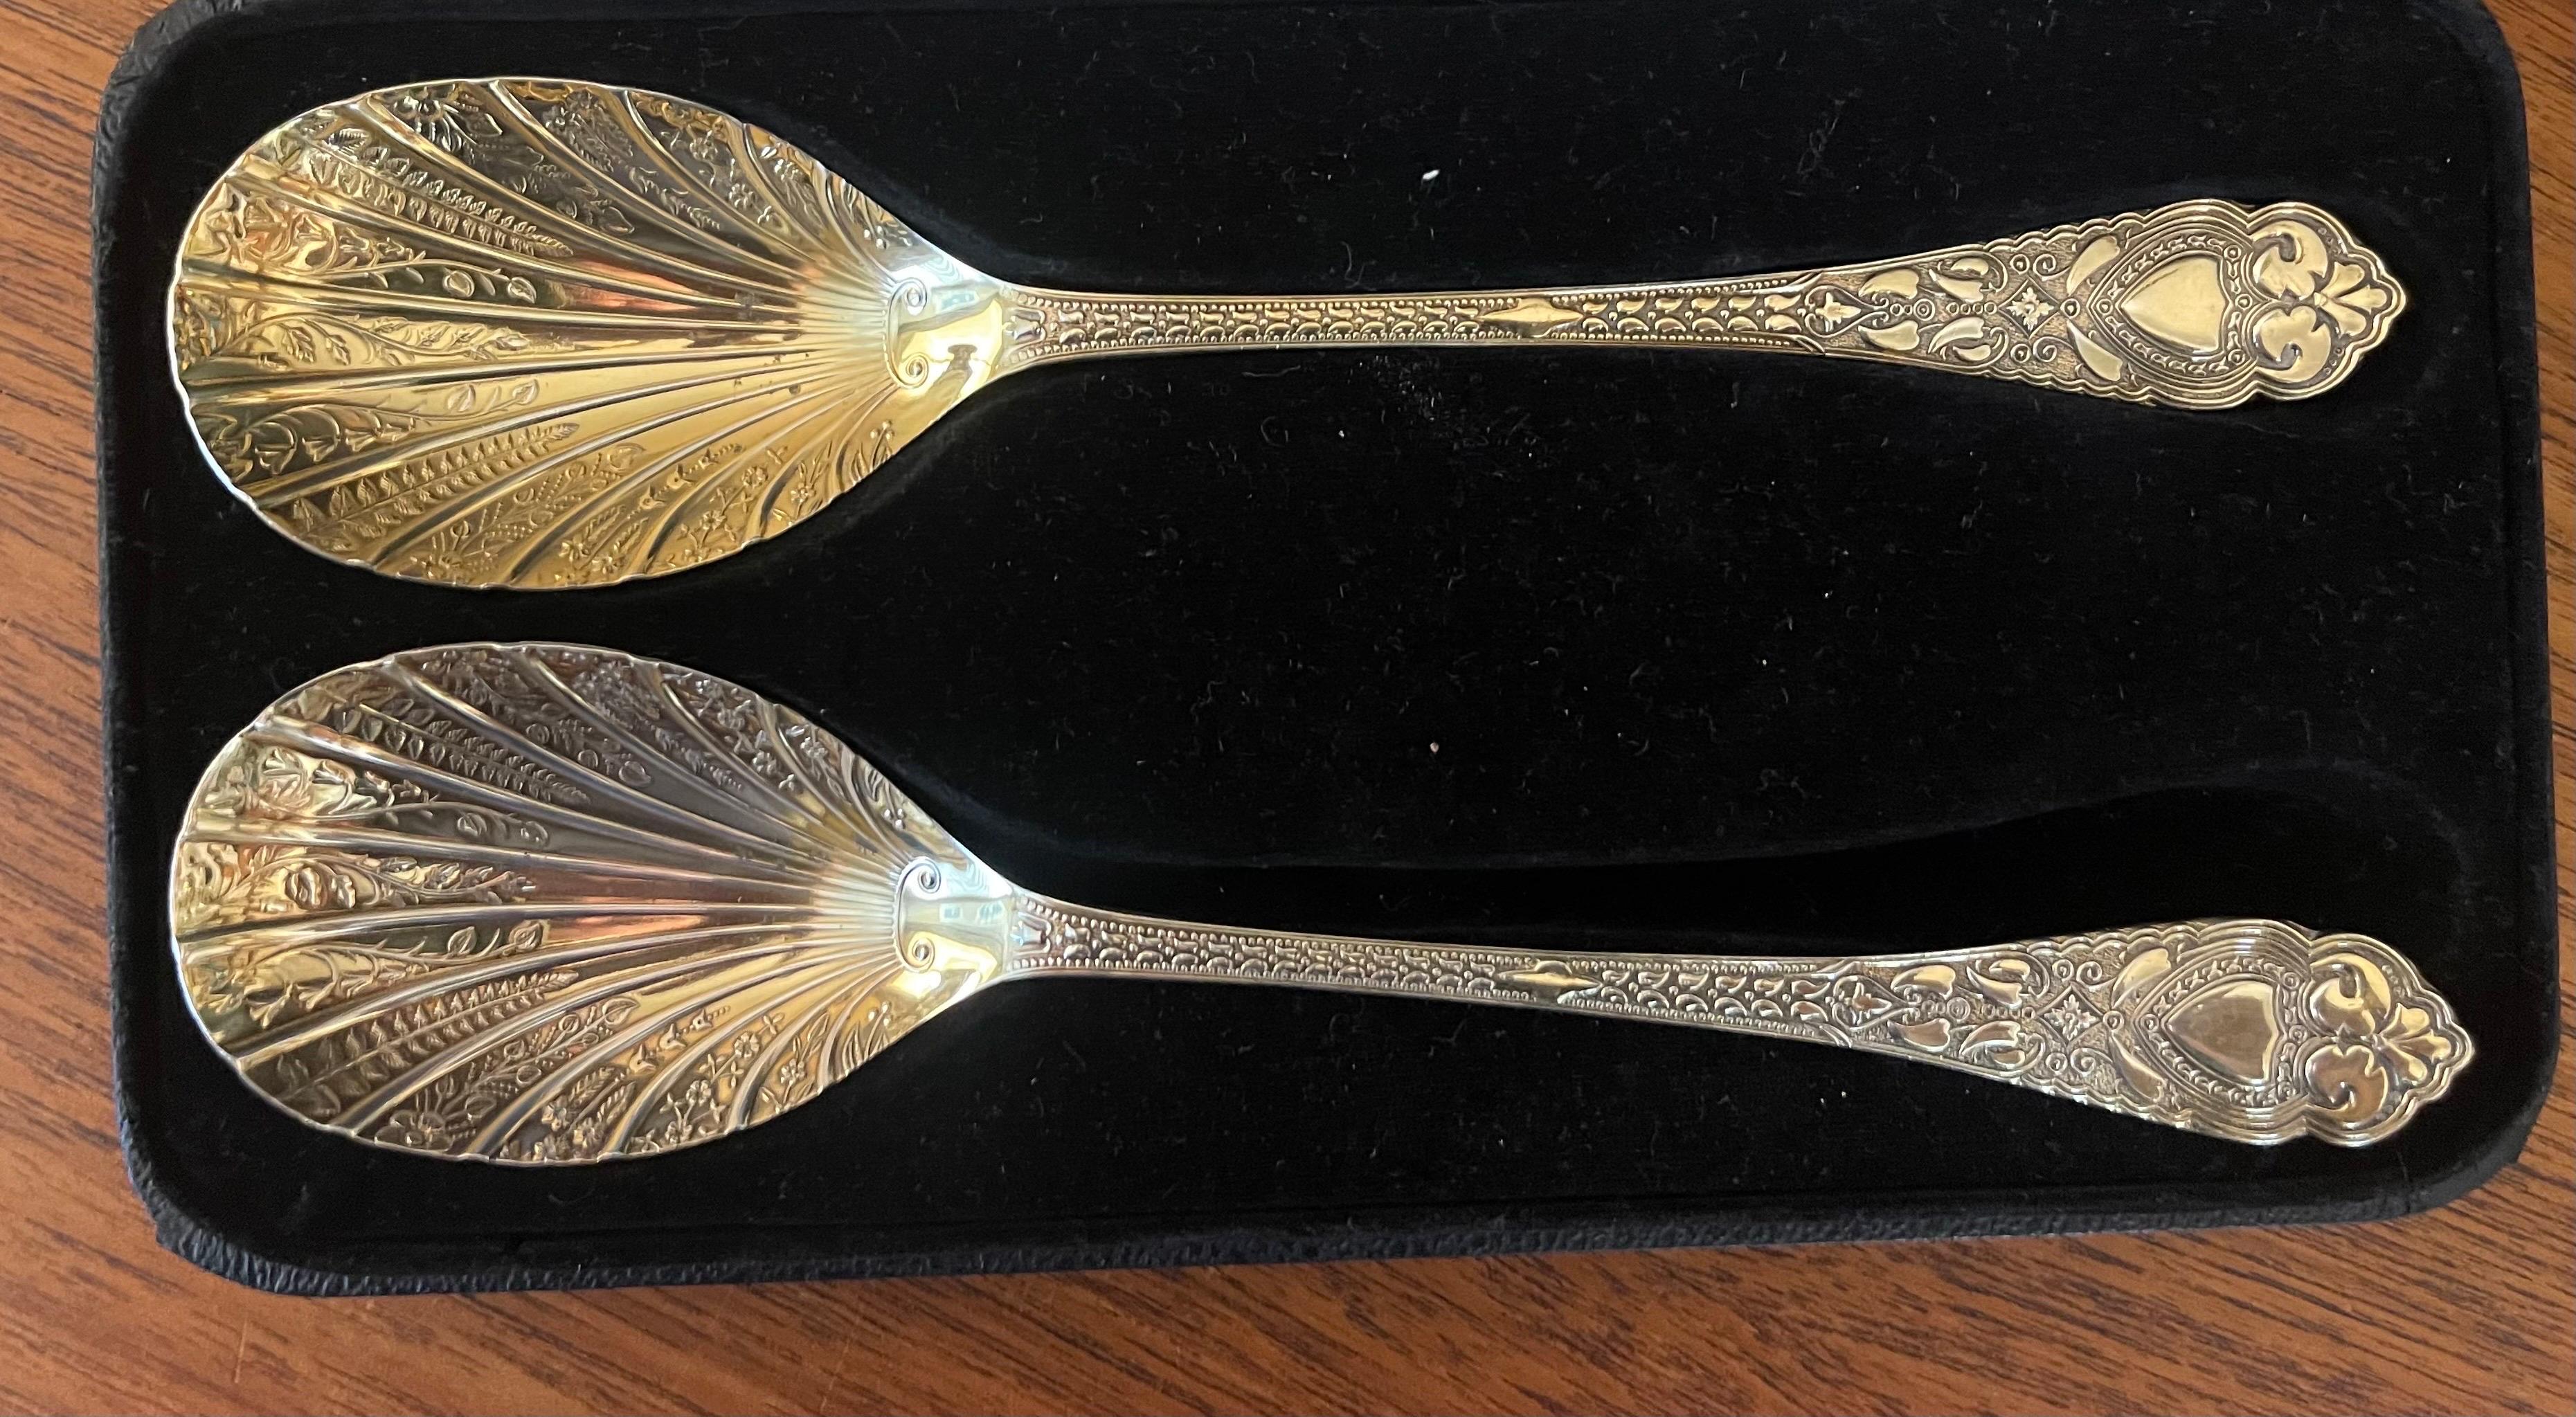 Elegant pair of Sheffield silver plated serving spoons in custom box by I. Magnin, circa 1940s. The spoons are in very good vintage condition and and measure 9